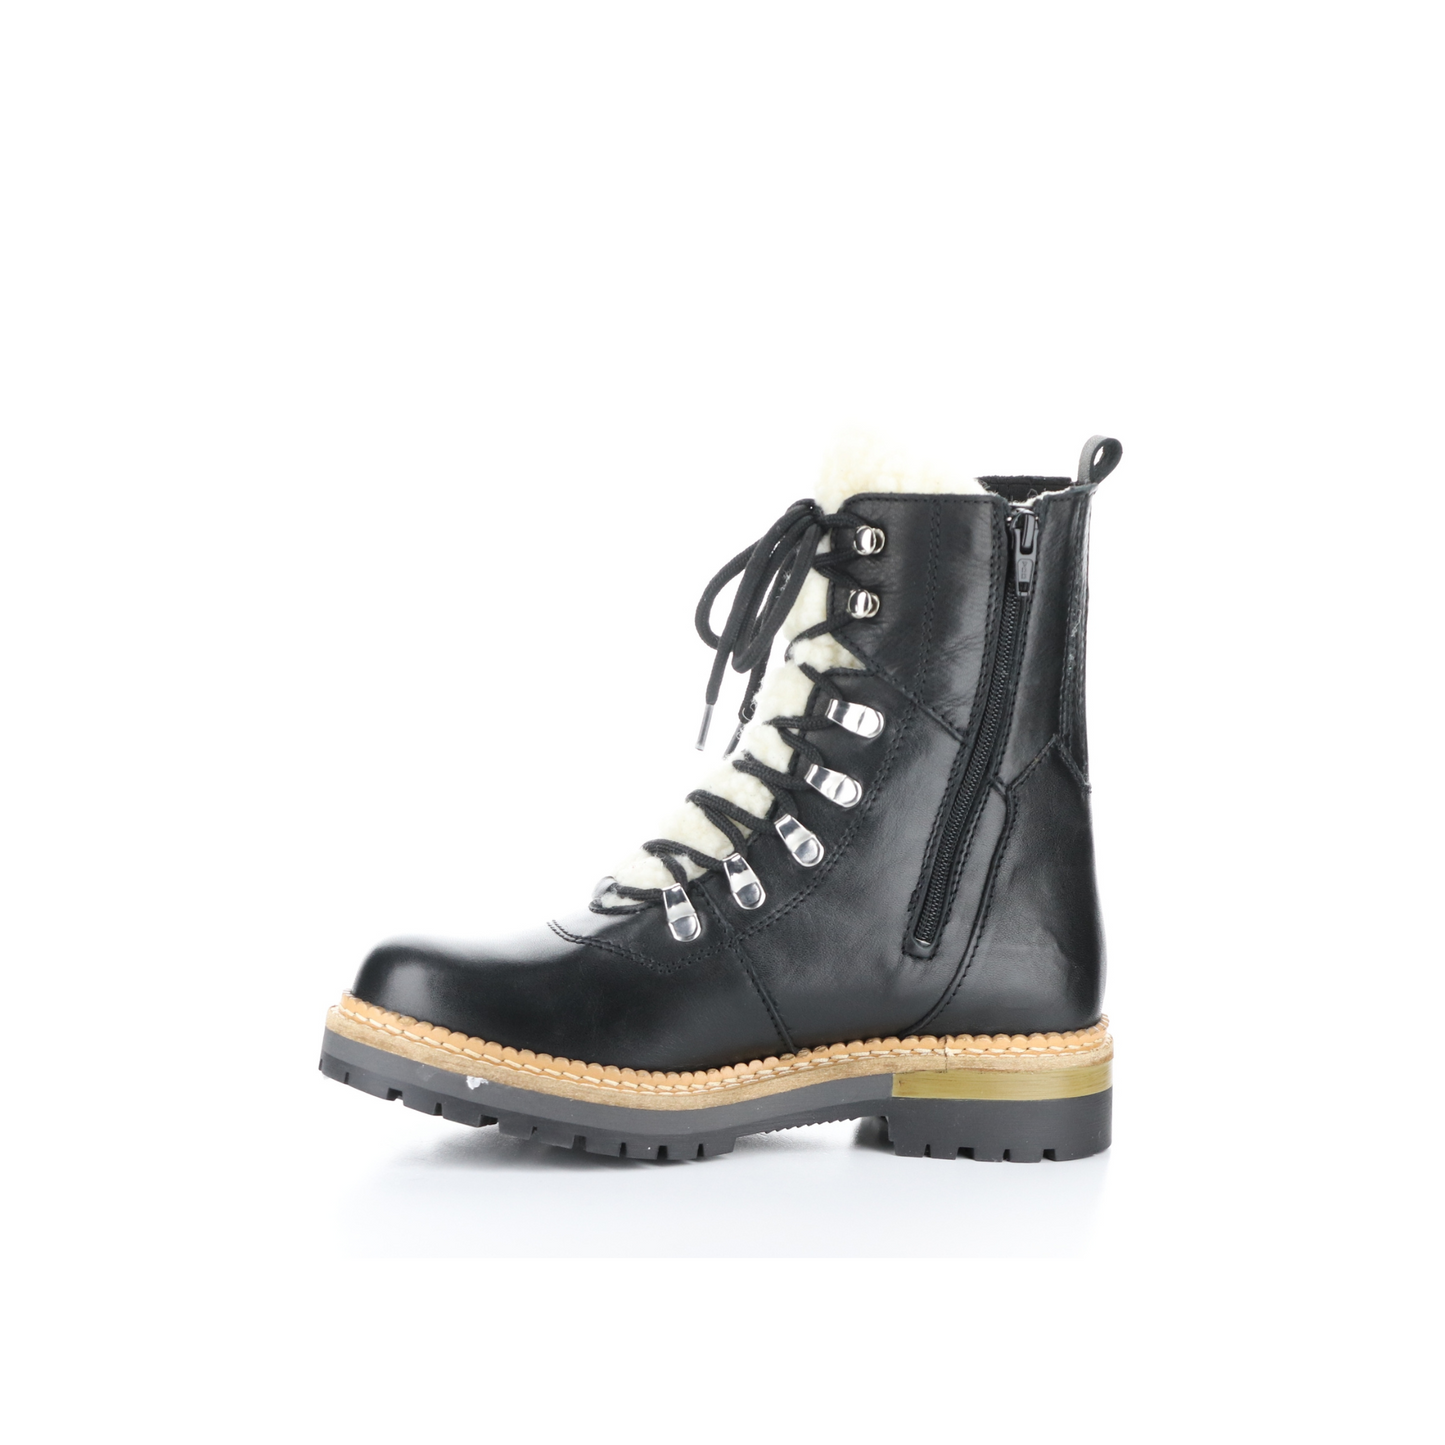 Black leather and Merino wool boot shown in left profile. Side zipper for easy entry. Black rubber sole.